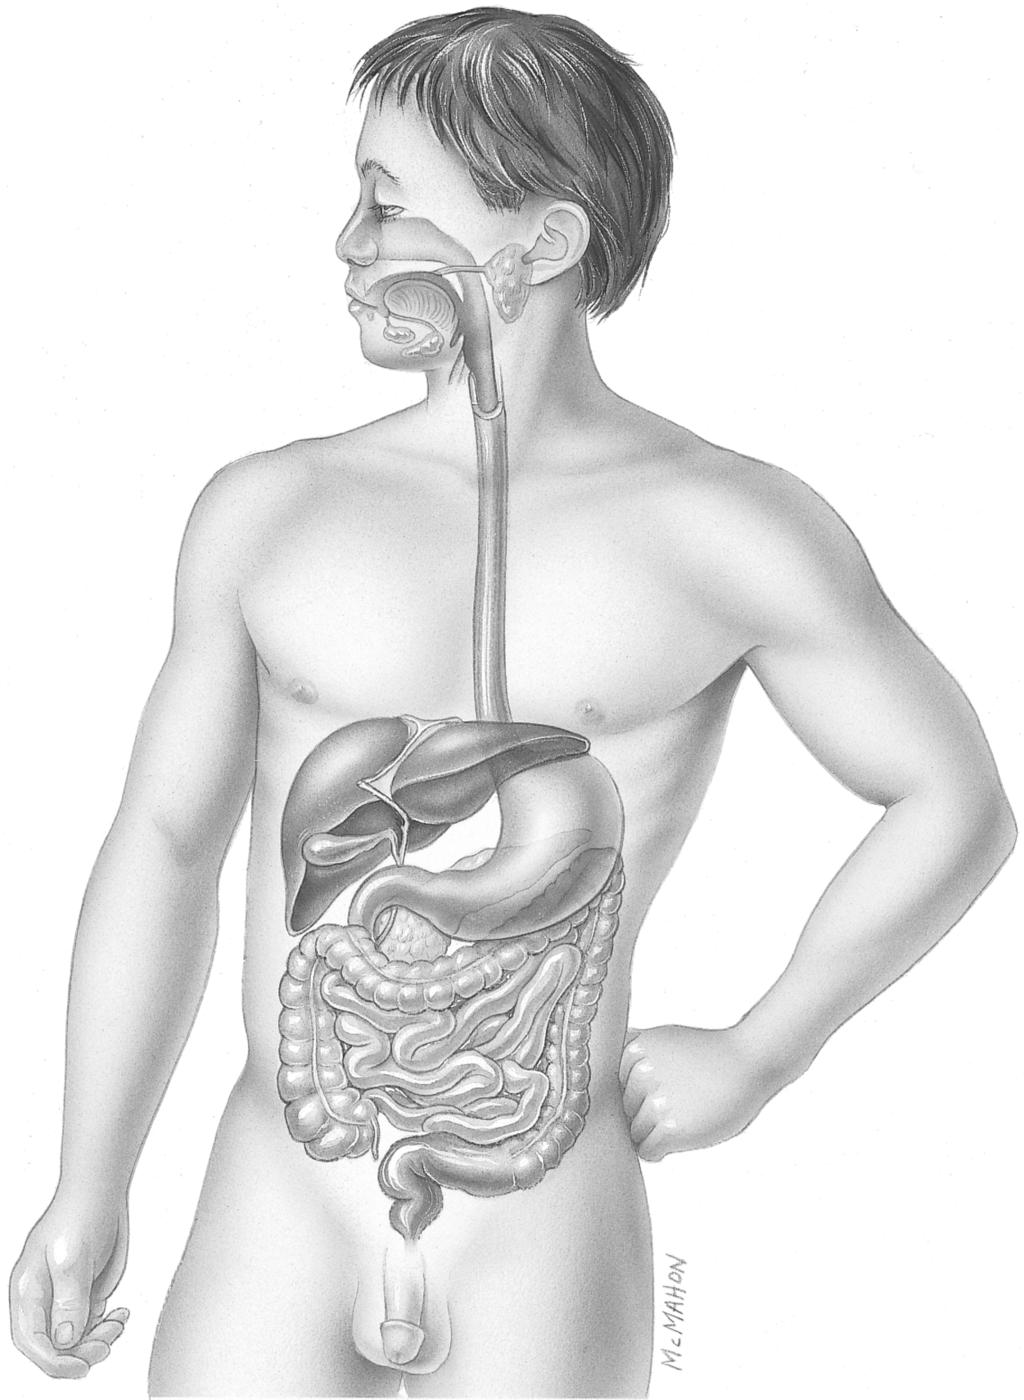 D. Labeling Exercise 92. Label the parts of the digestive system as indicated in Figure 16-1.